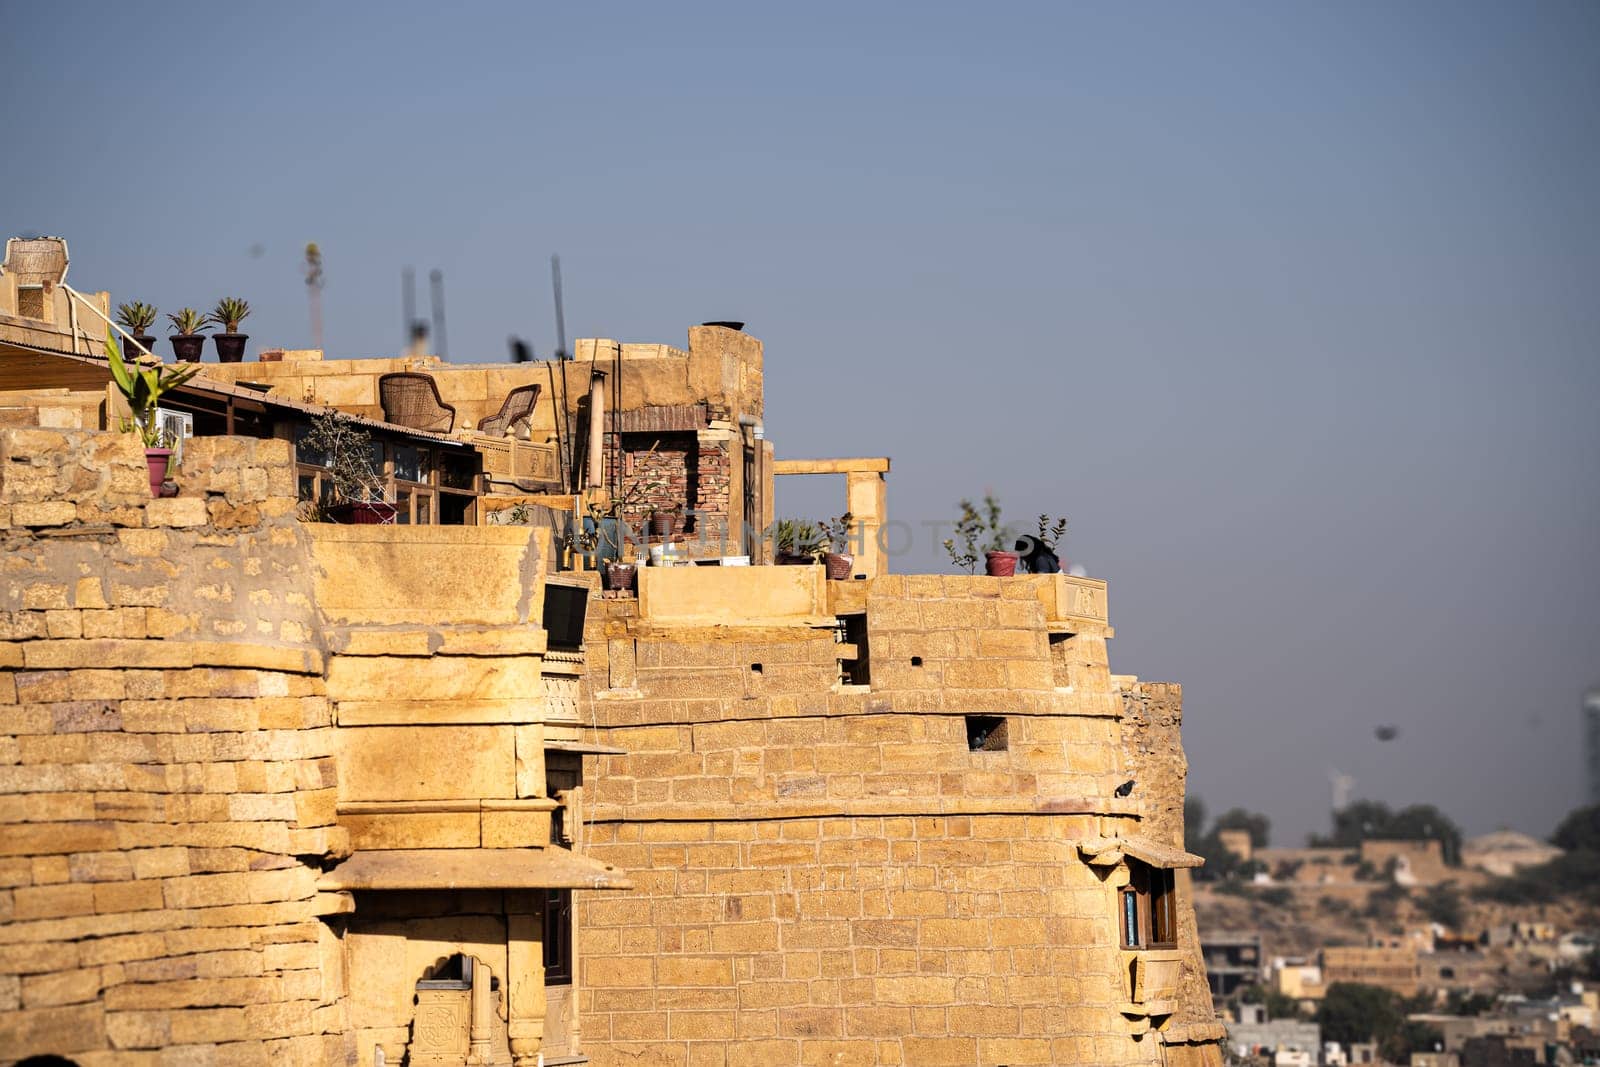 brown sandstone walls of the Jaisalmer Golden fort a popular tourist destination settled by rajput families in the state of Rajasthan India